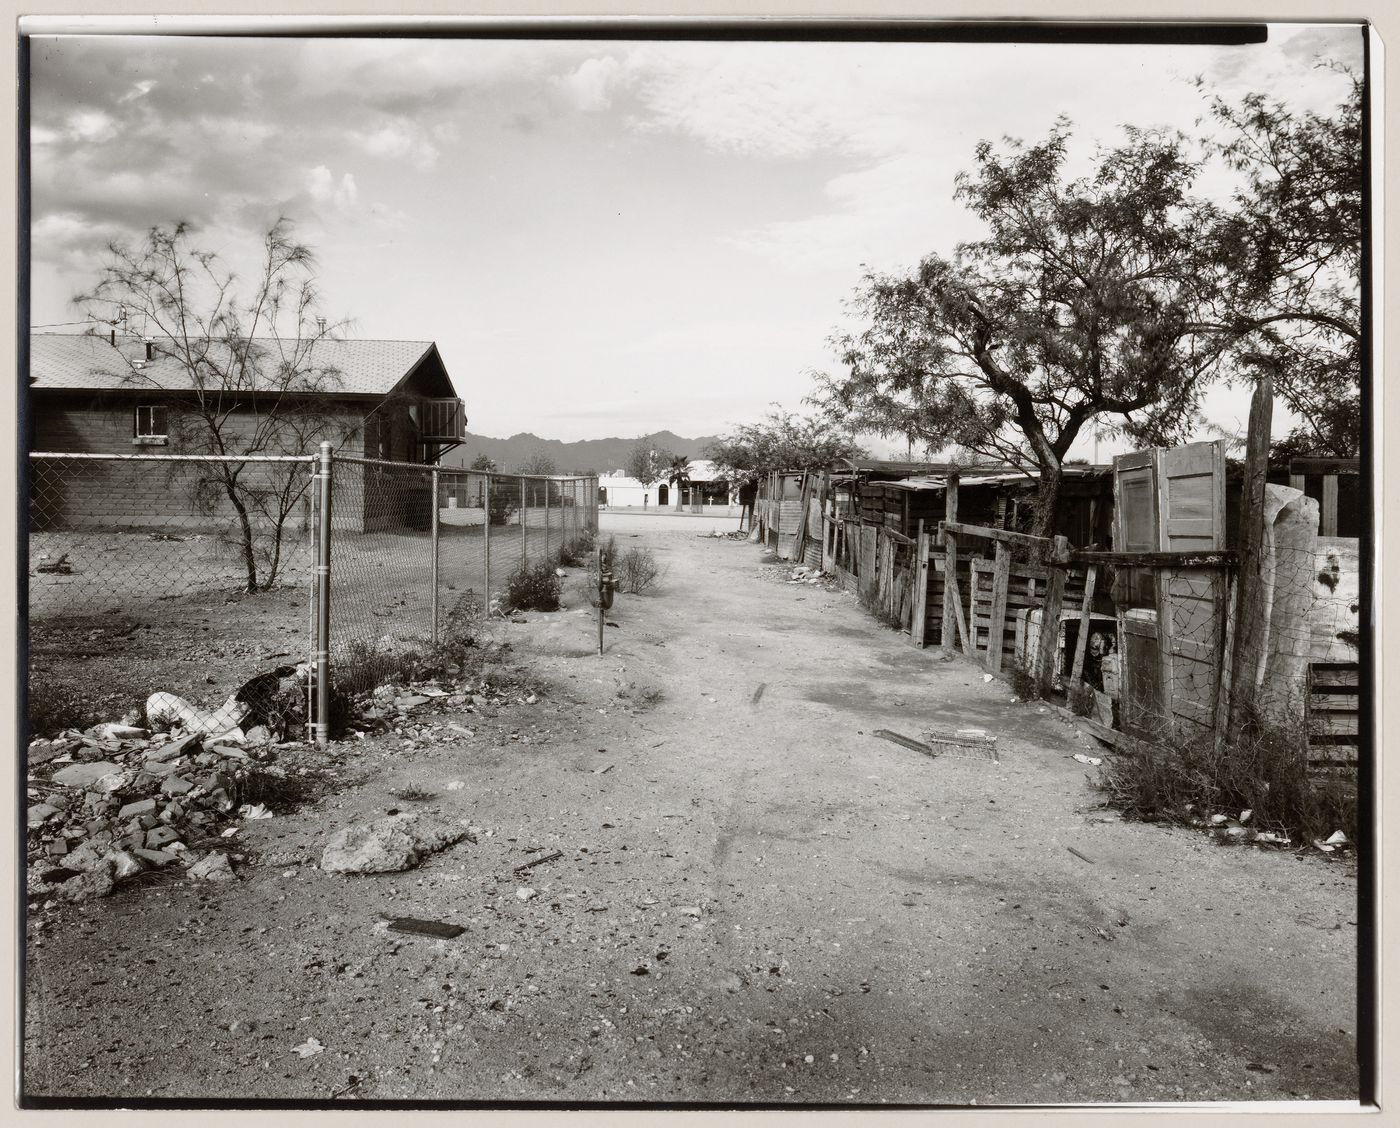 View of path to church, Old Pascua, Tucson, Arizona, United States (from a series documenting the Yaqui community of Old Pascua)